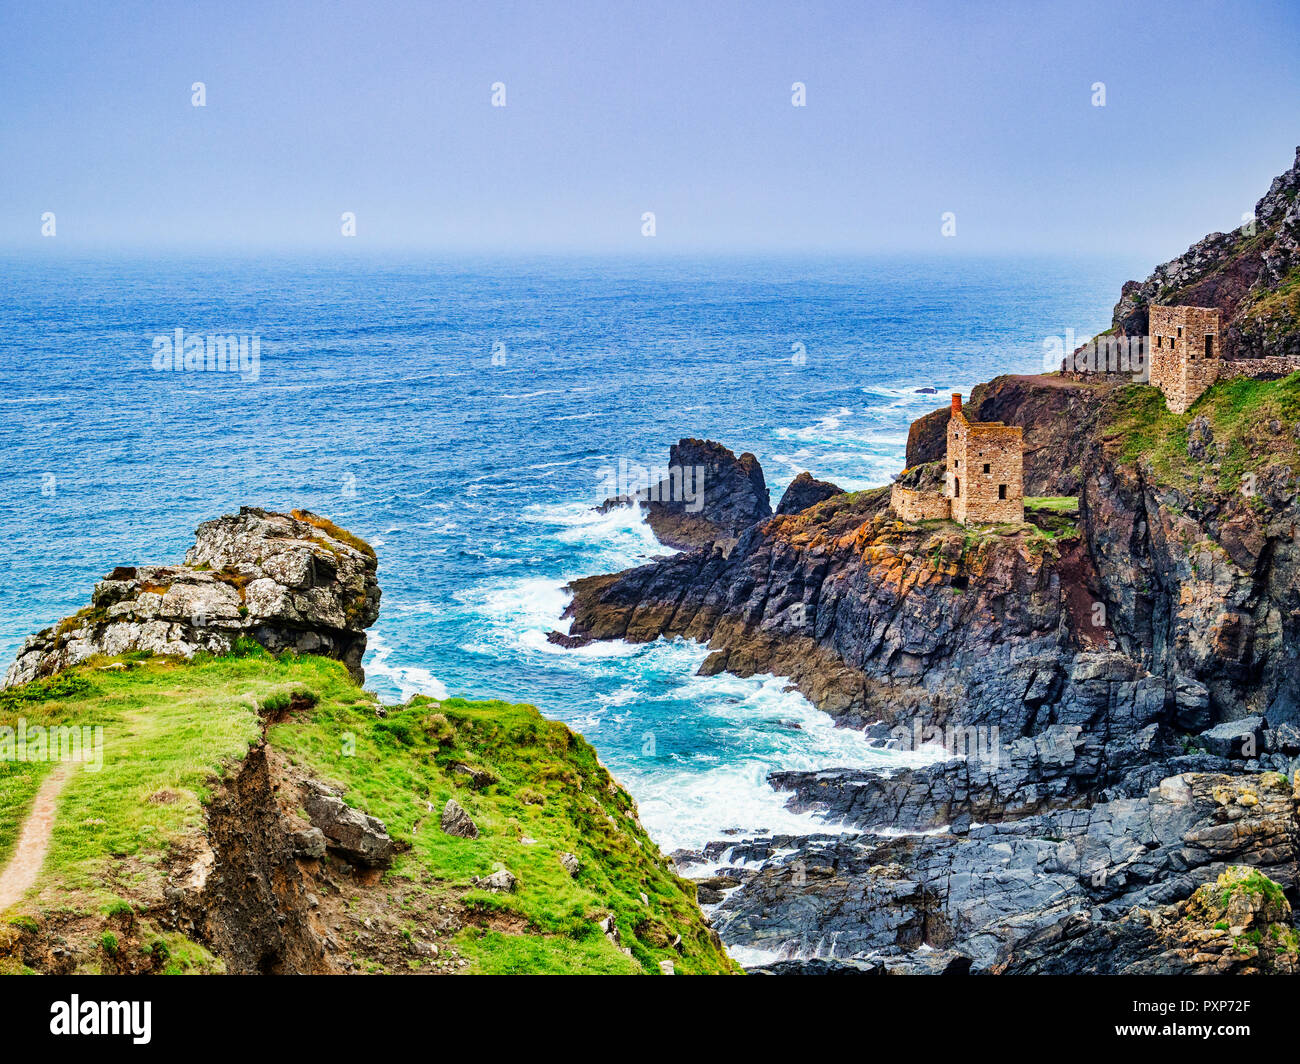 The Crowns Engine Houses, part of the Botallack Mine in Cornwall, England,UK. Stock Photo